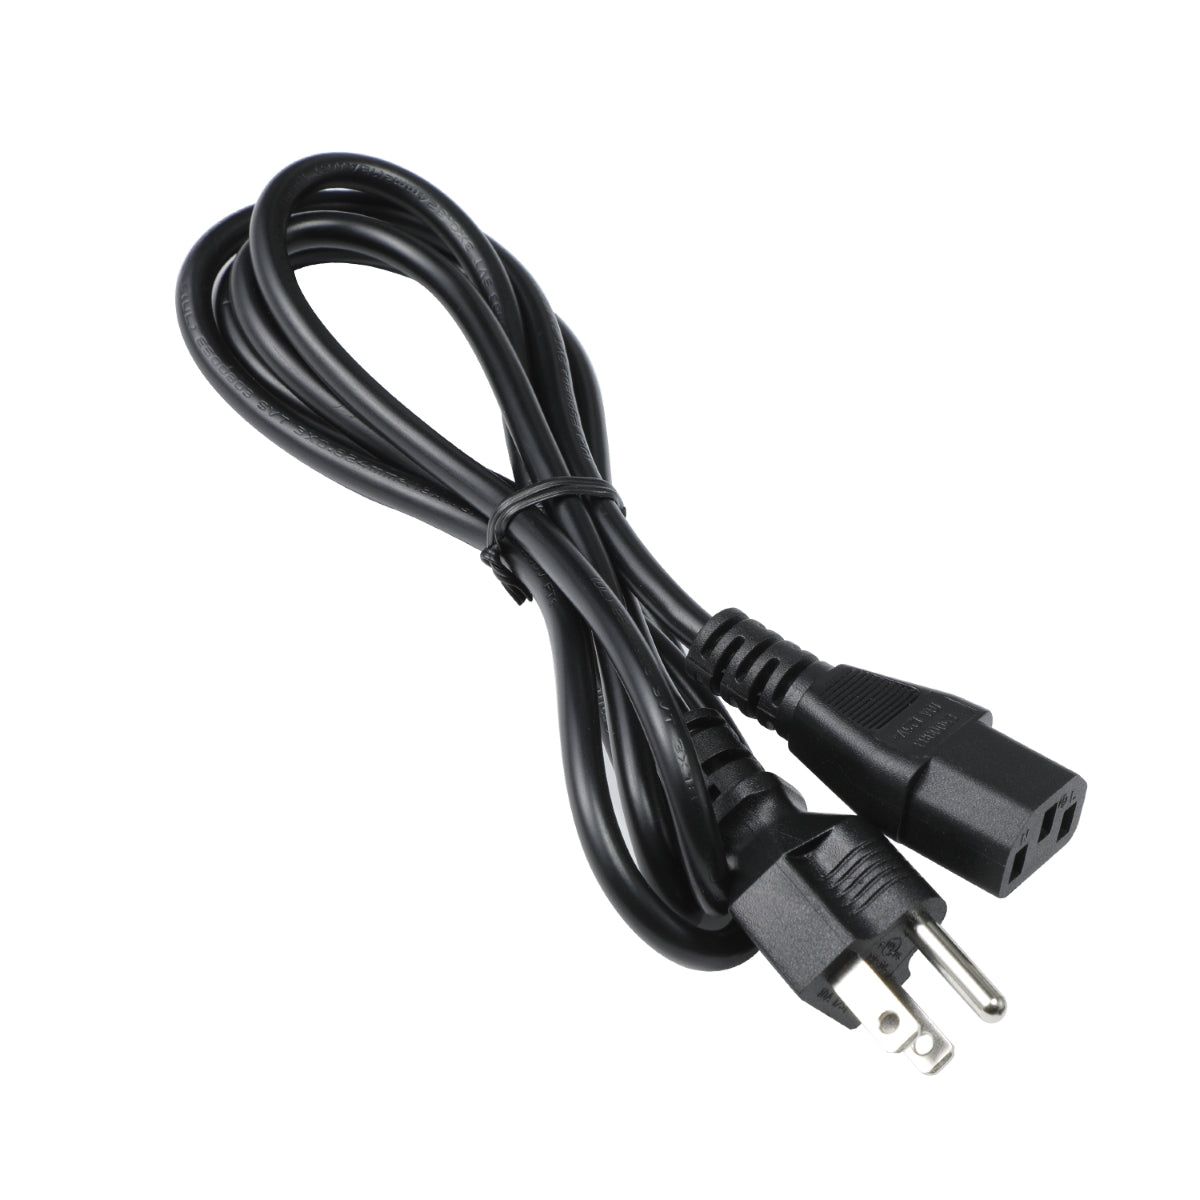 Power Cable for Philips 272P7VUBNB Monitor.